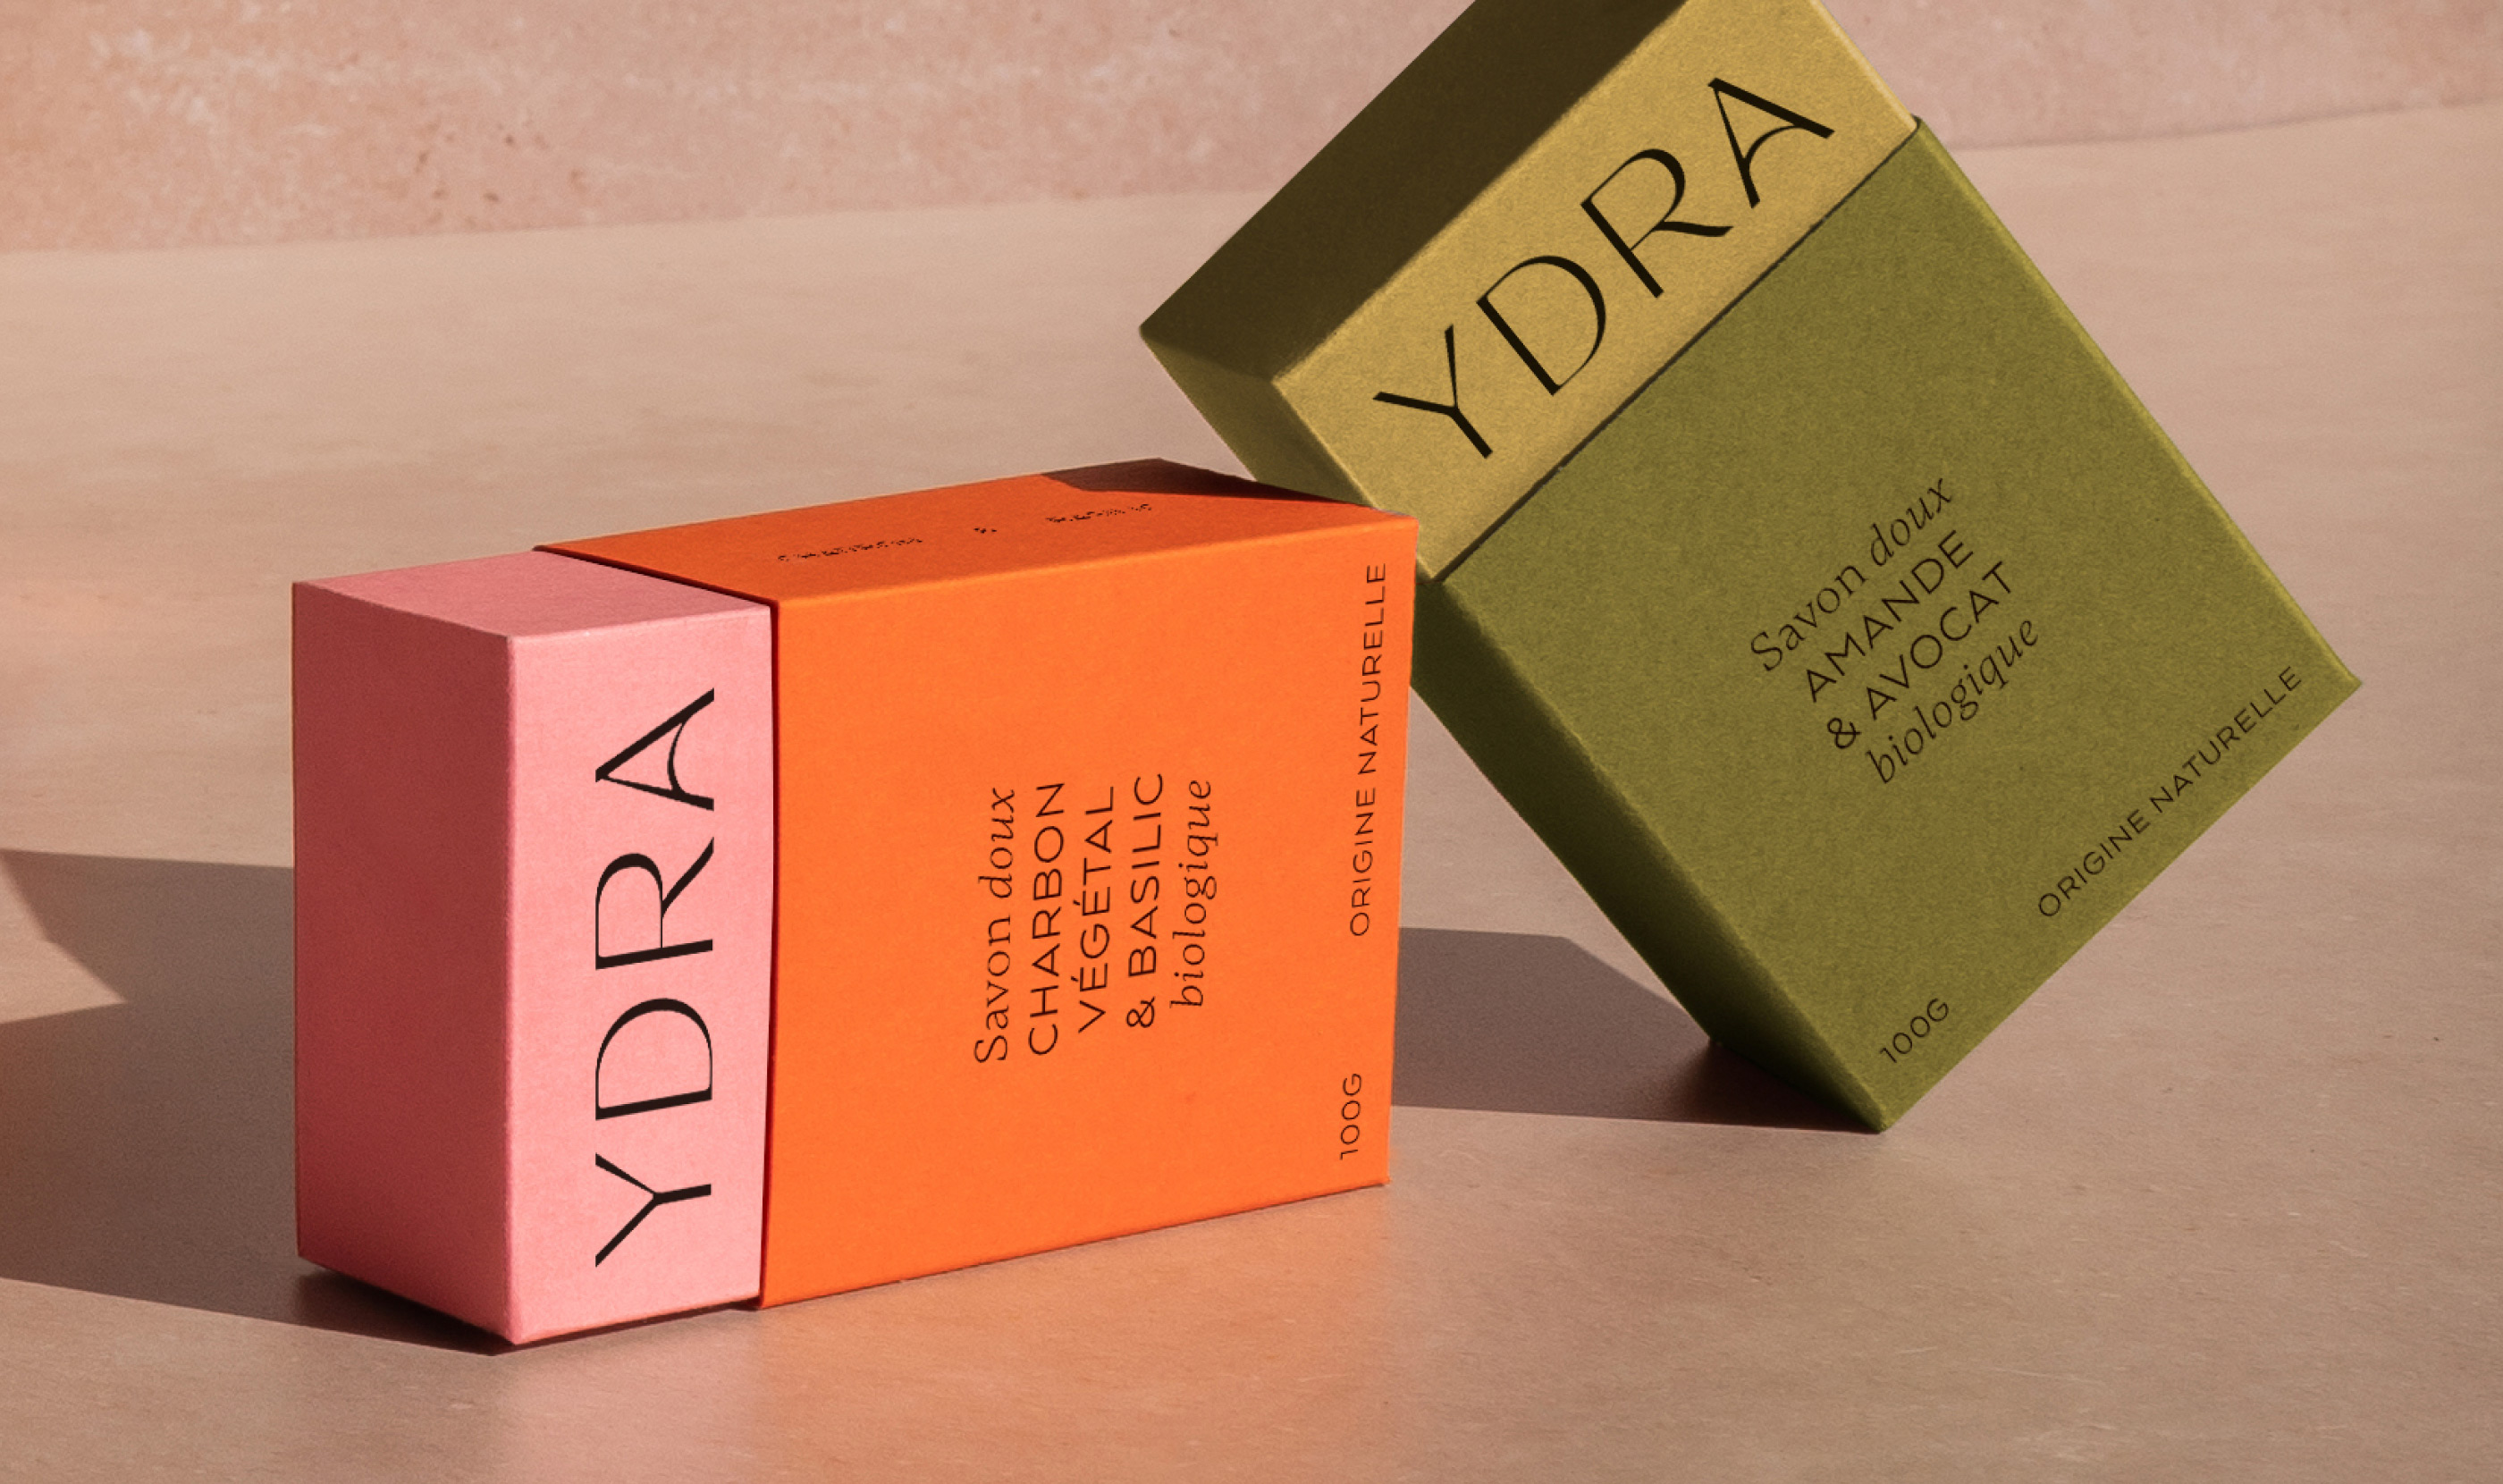 Designing Natural Beauty and Eco-Friendly Packaging for Ydra by Atelier César